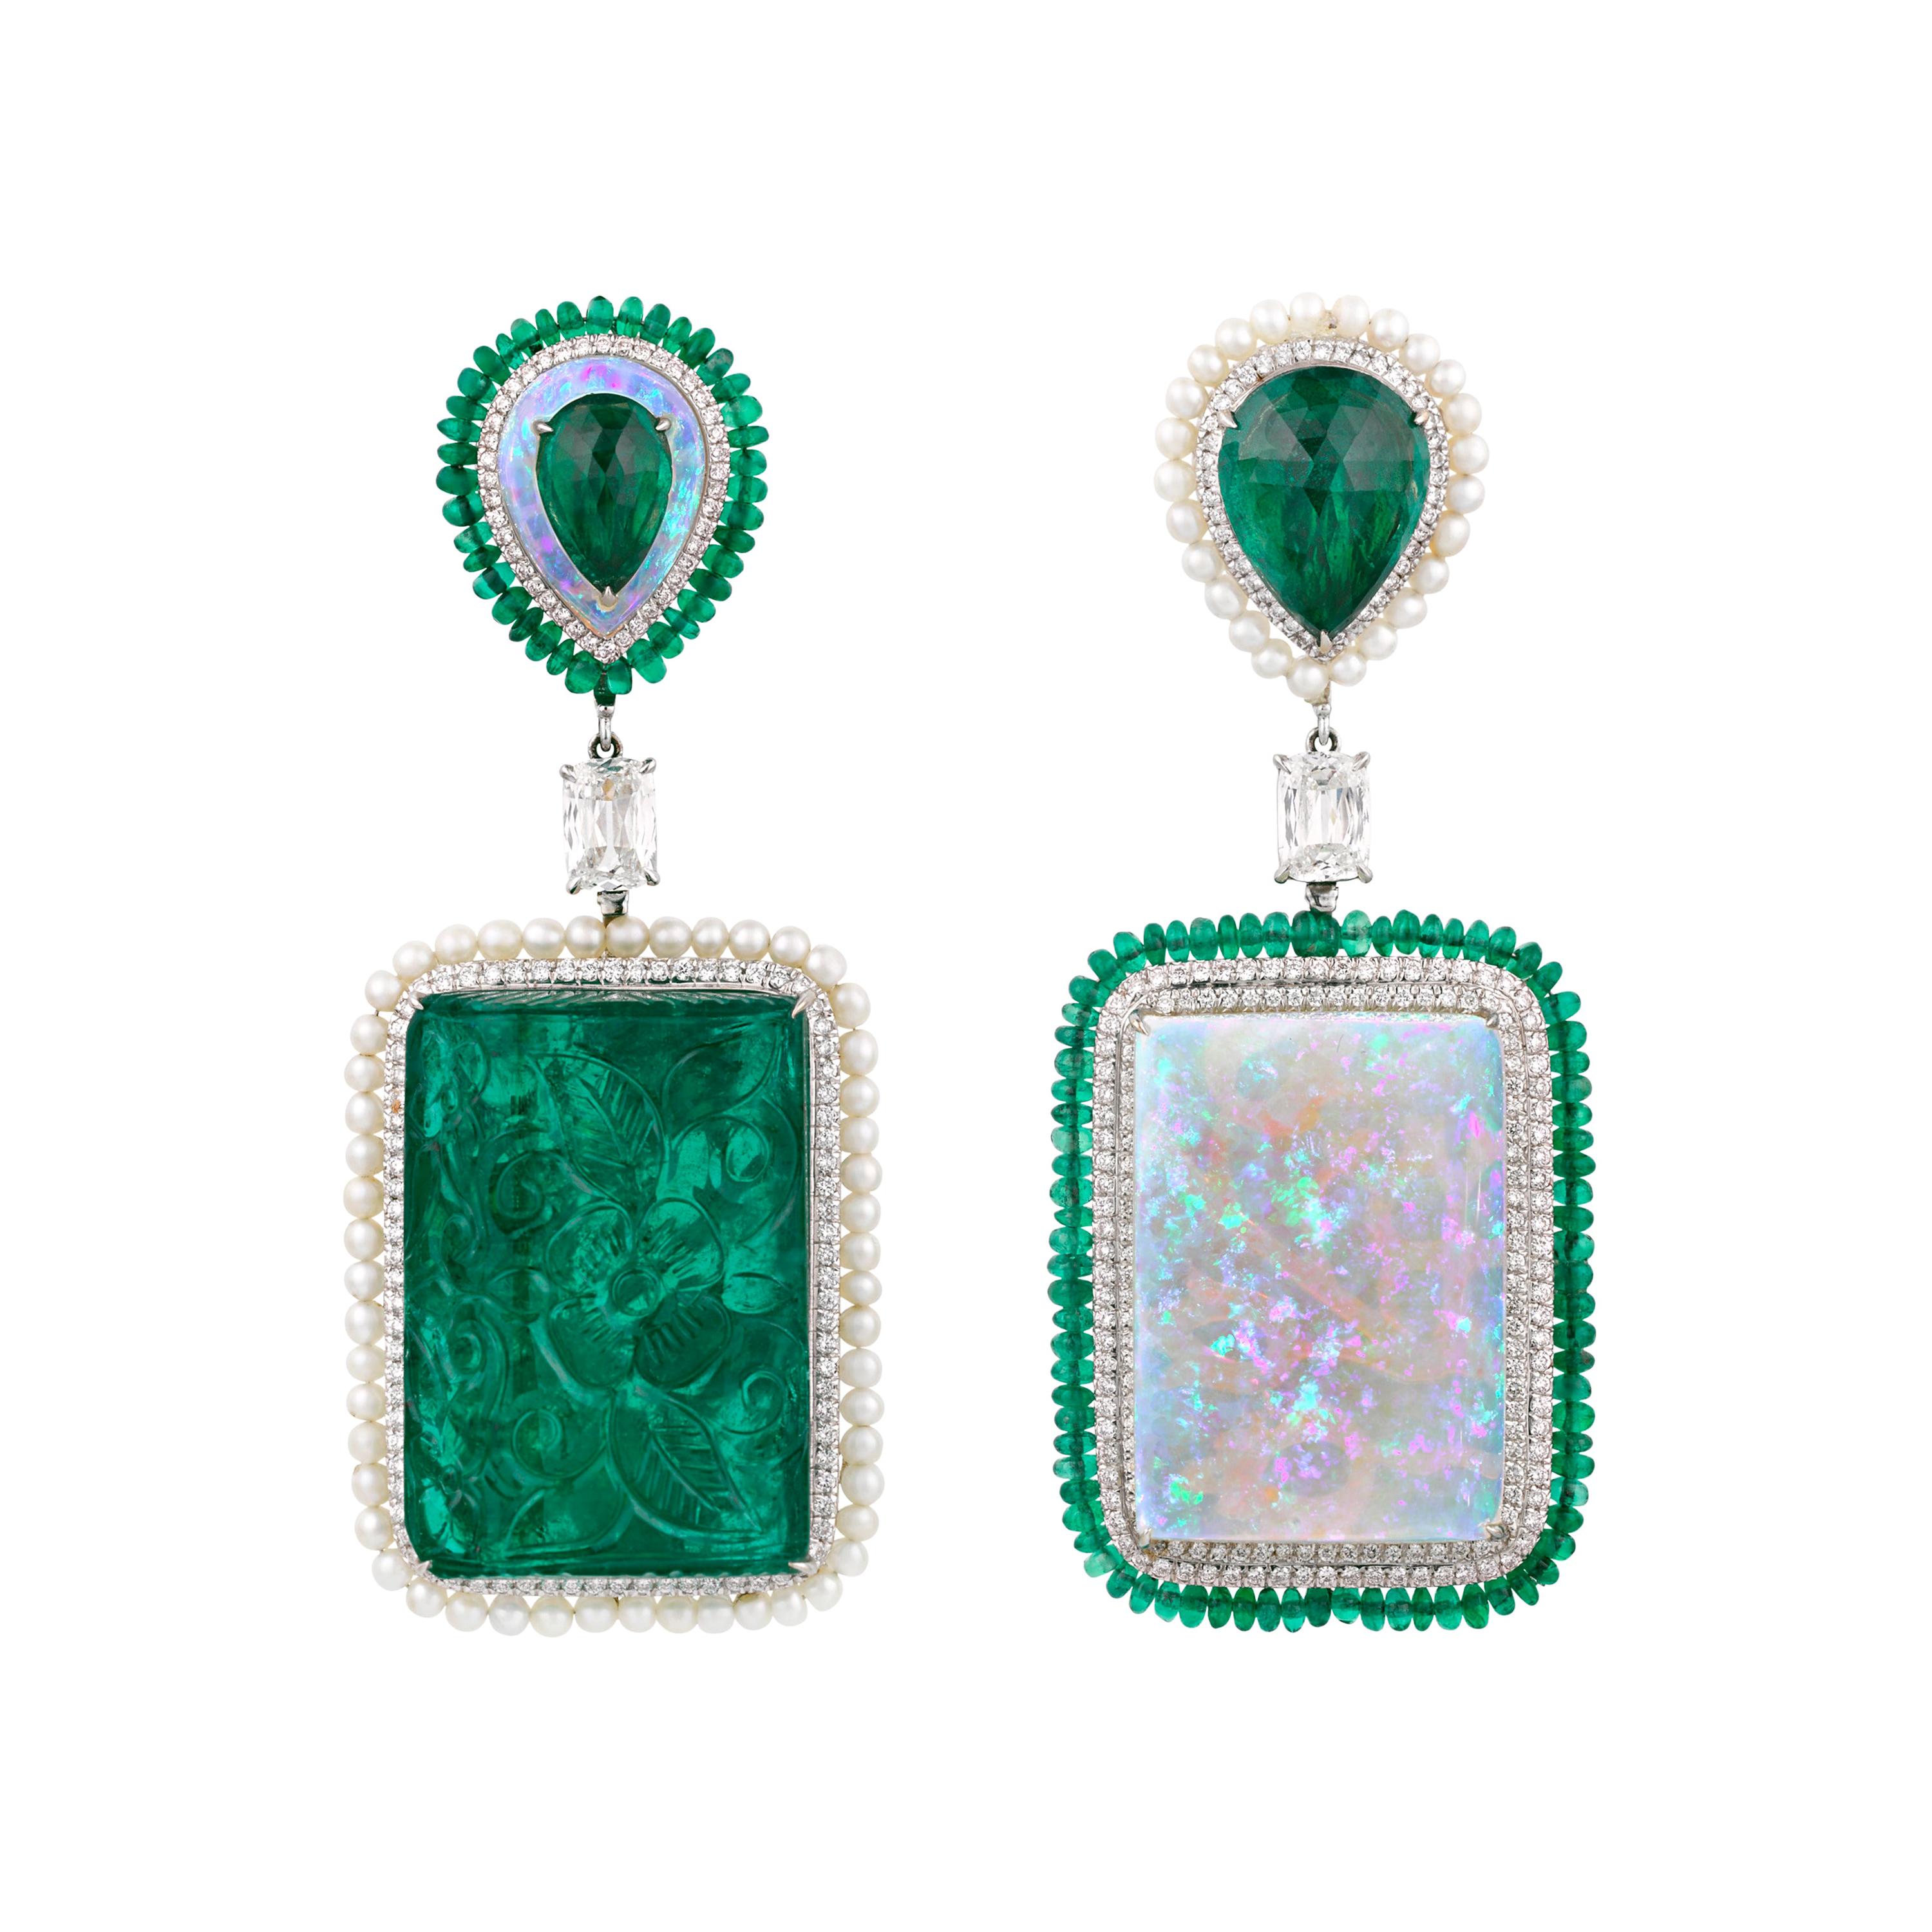 Carved Emerald, Opal and Diamond Earrings